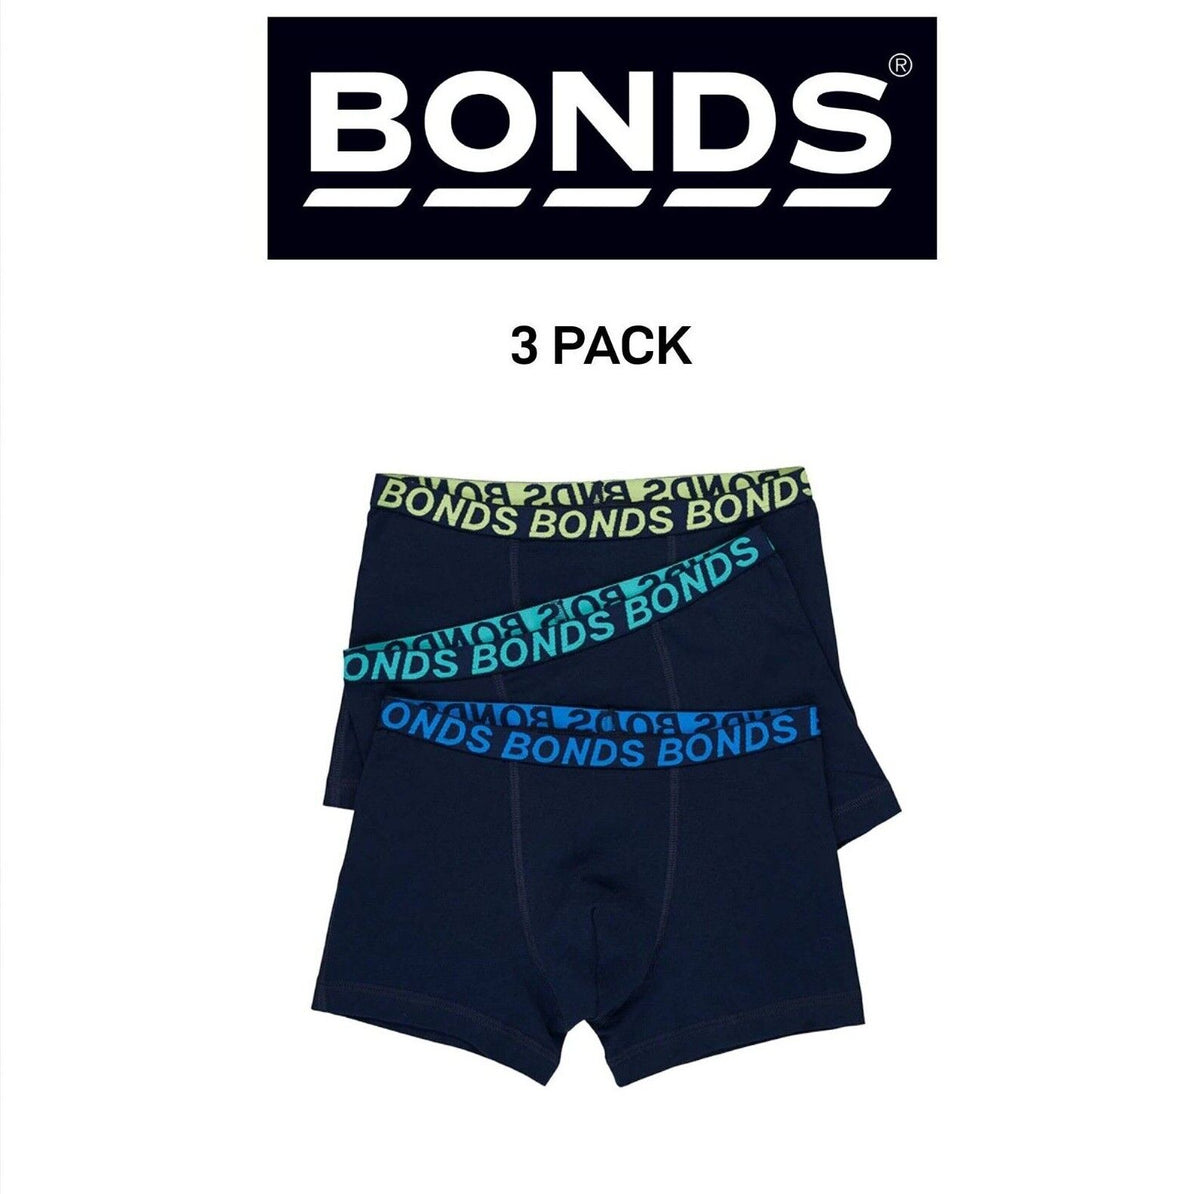 Bonds Boys Trunk Sport Moisture Wicking Cool & Dry Comfort Covered 3 Pack UWKN3A